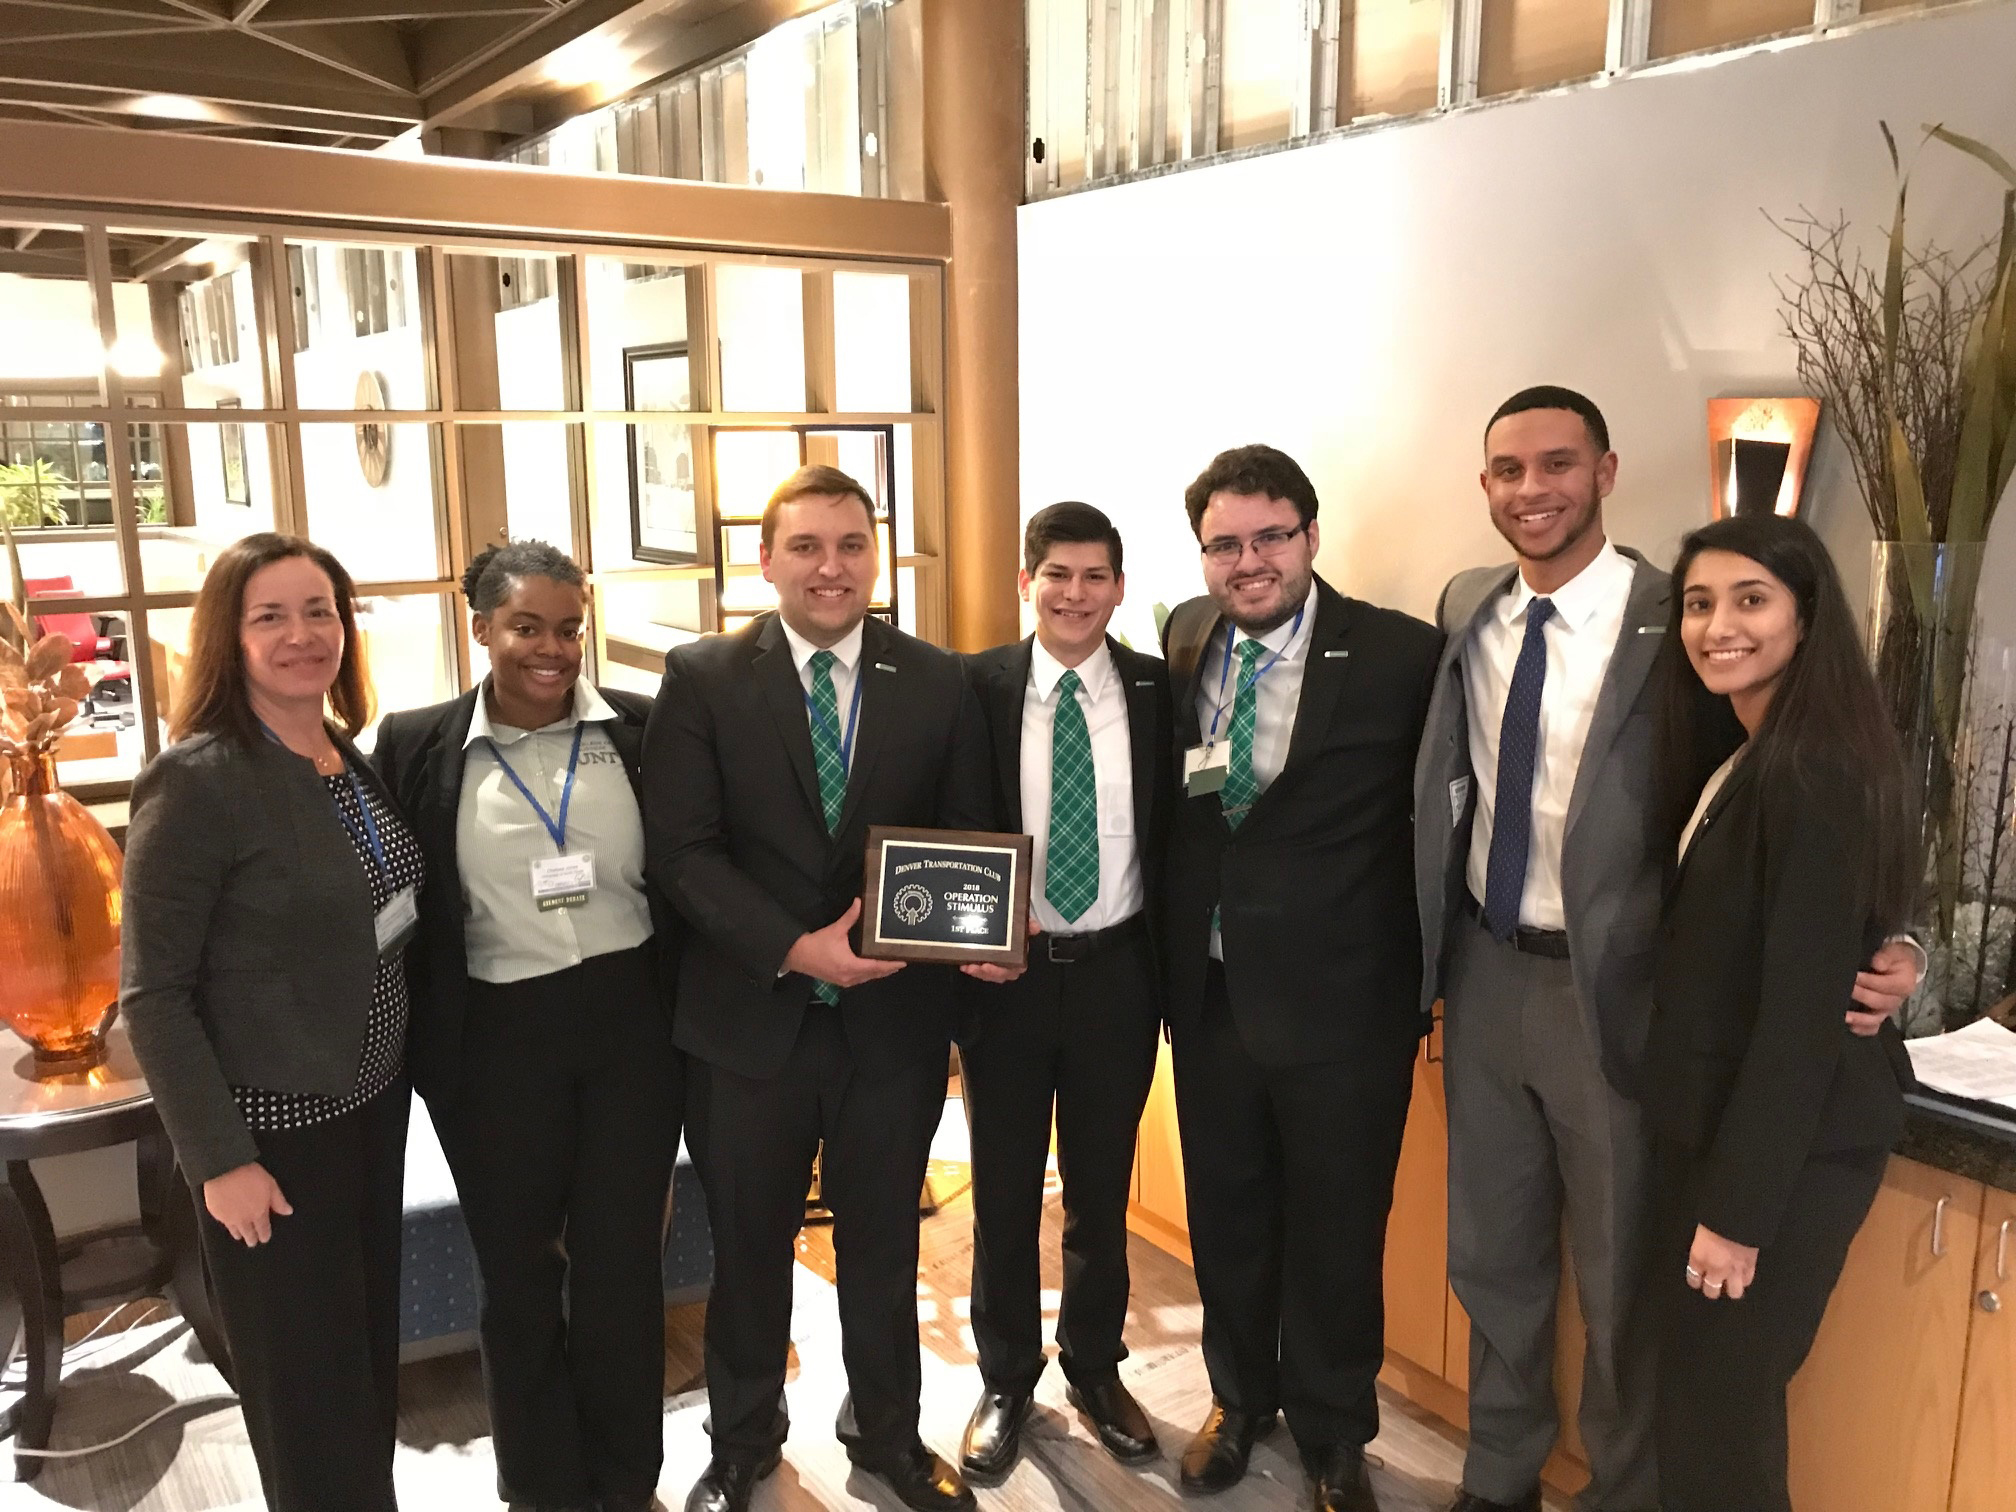 UNT students and their advisor pose after winning a major logistics competition.